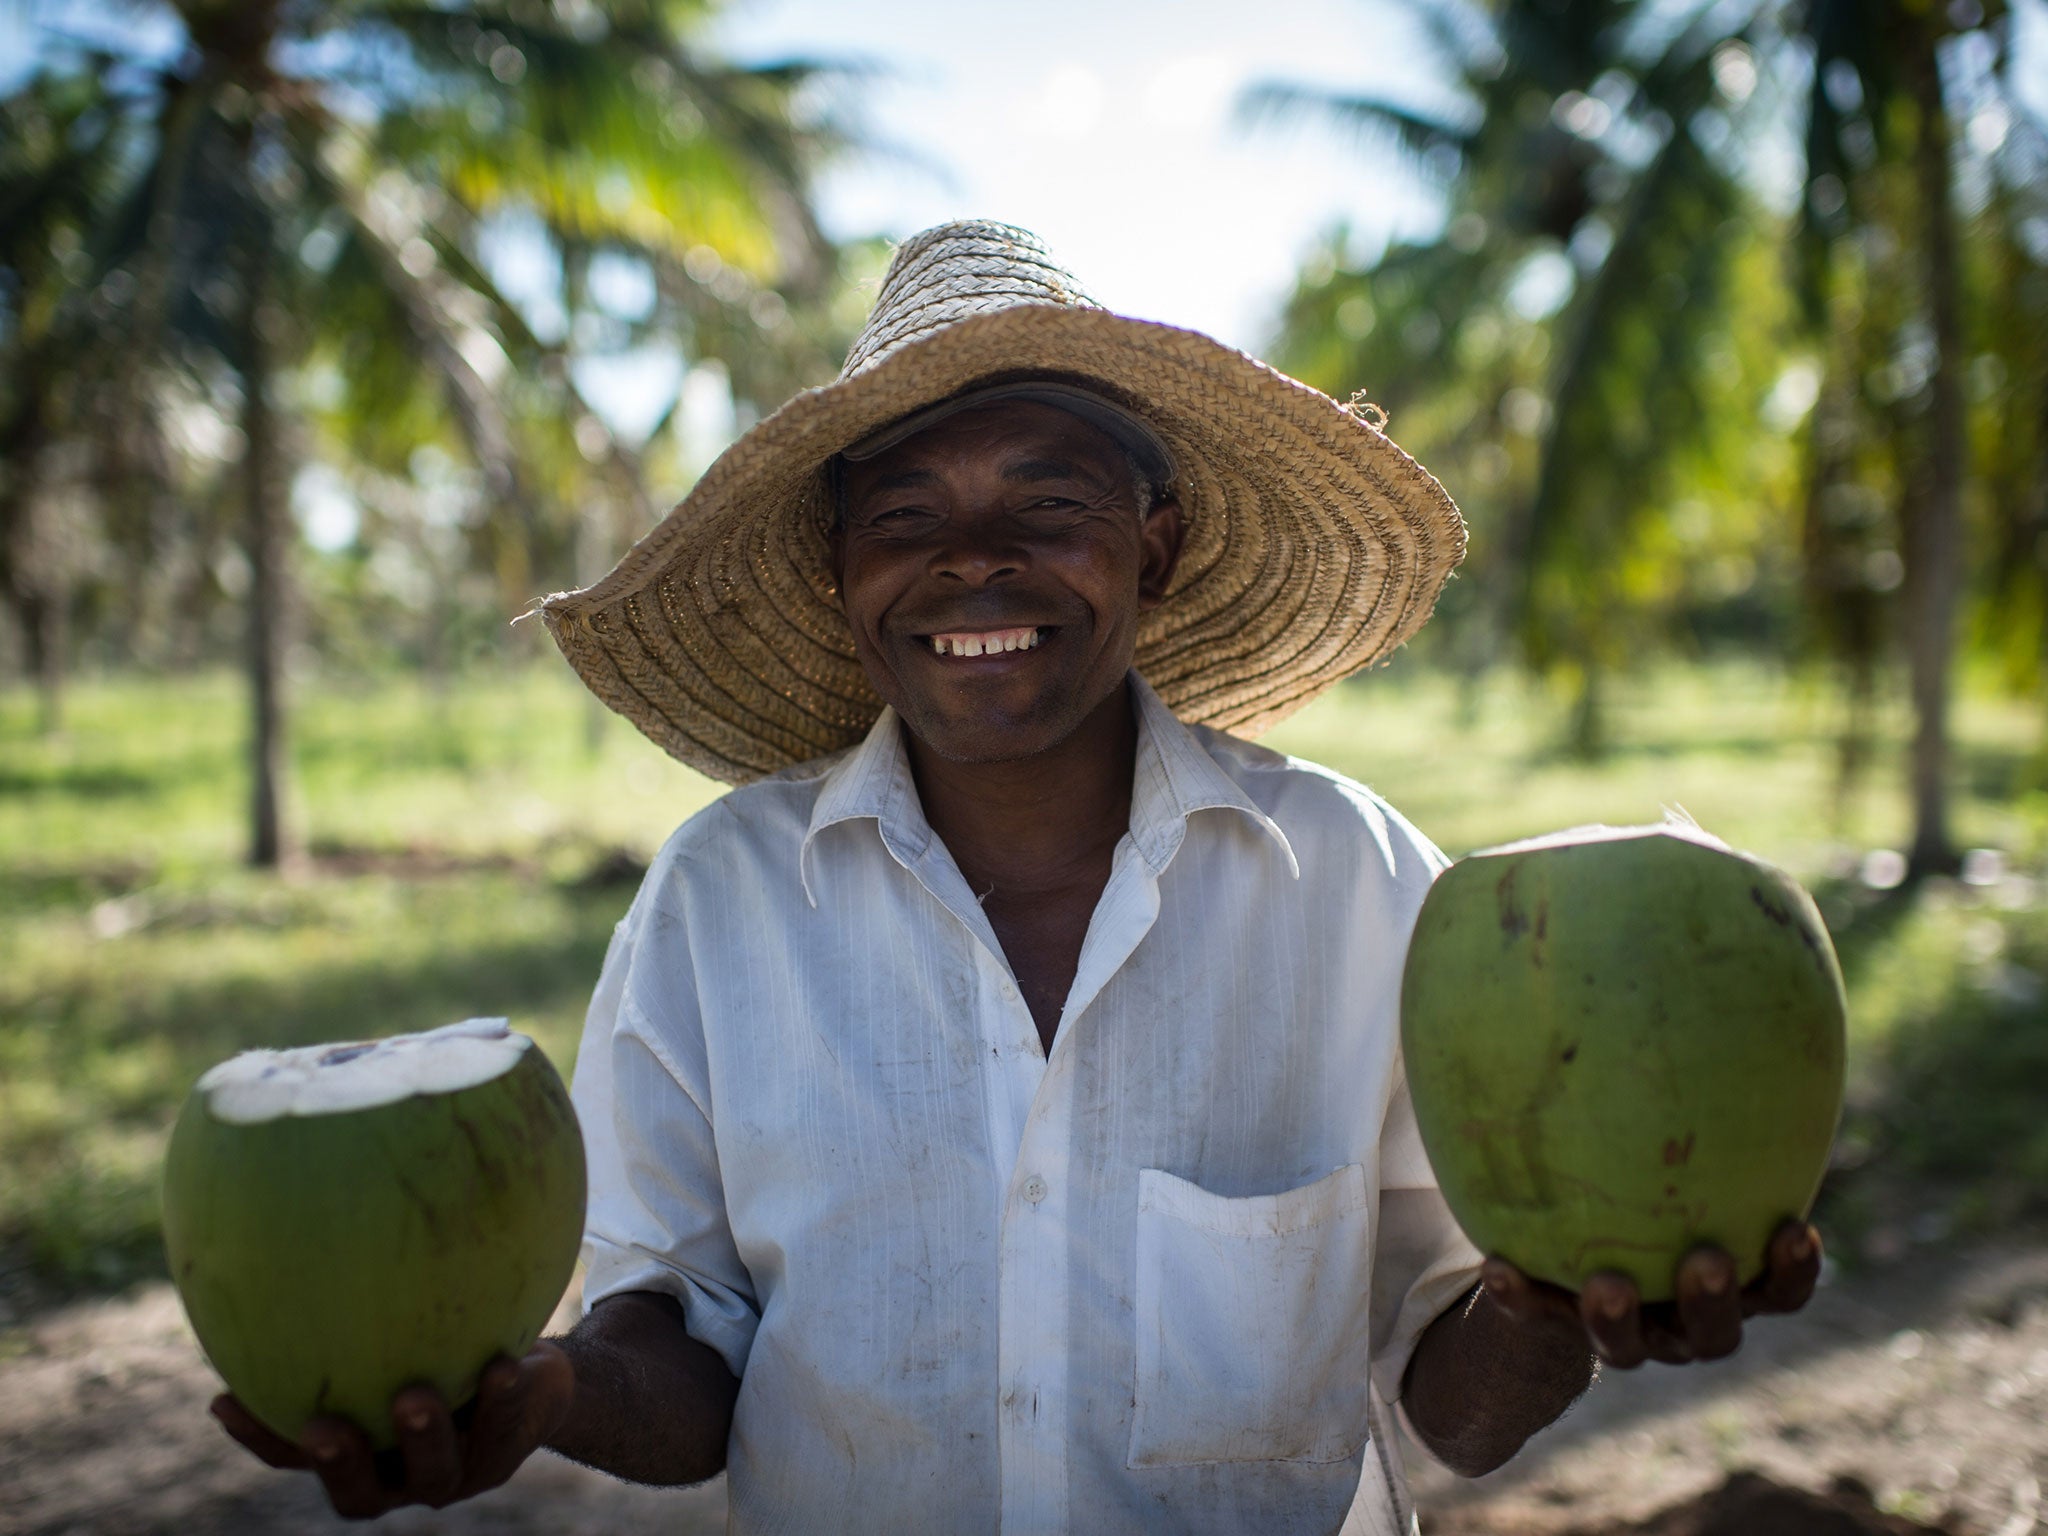 Tropical taste: a coconut farmer in Brazil shows off his wares